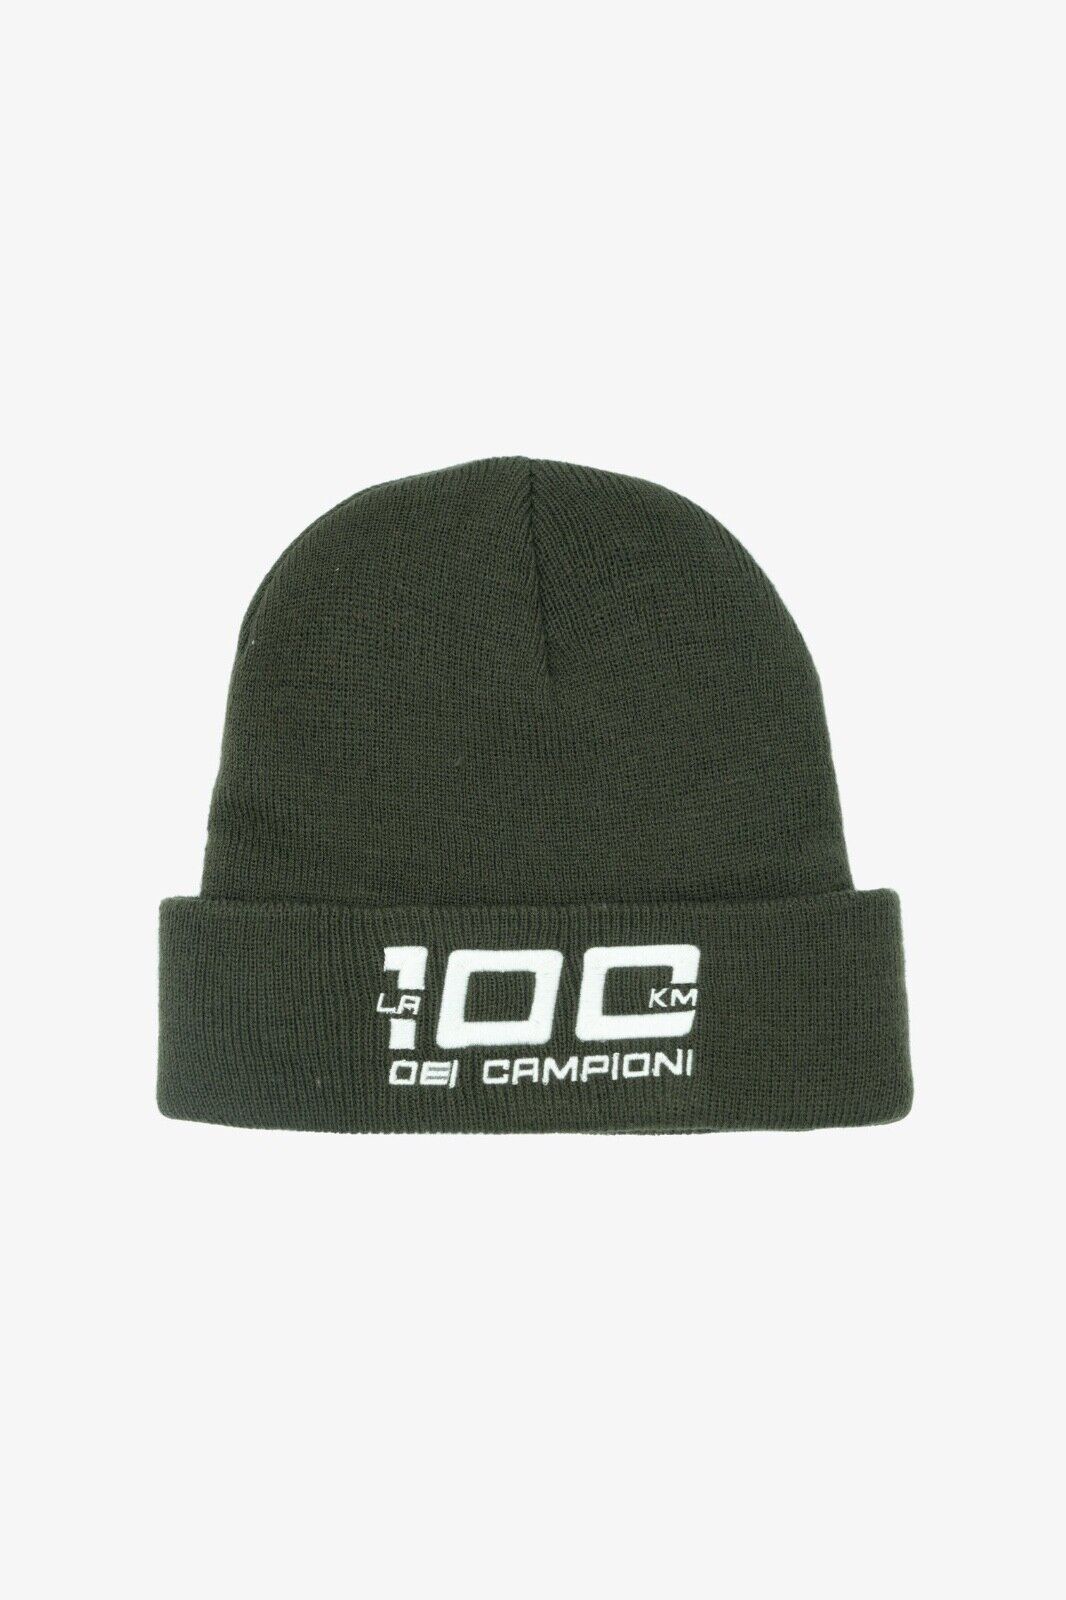 Official Valentino Rossi VR46 Ranch 100Km Champion Beanie - Ydmbe 467008